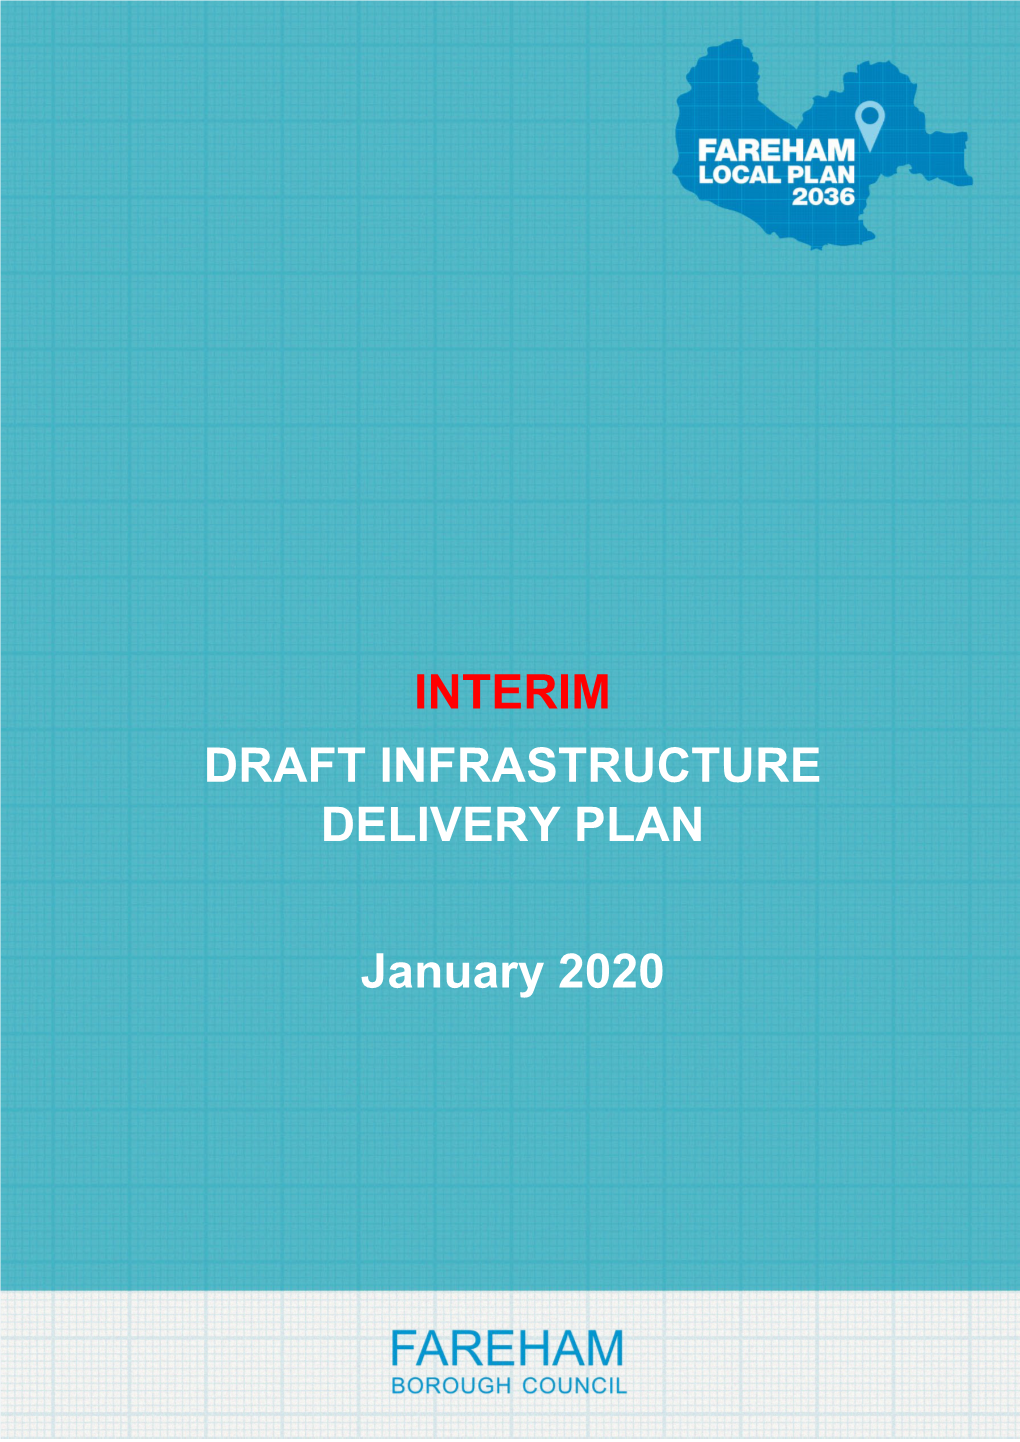 Draft Infrastructure Delivery Plan Update